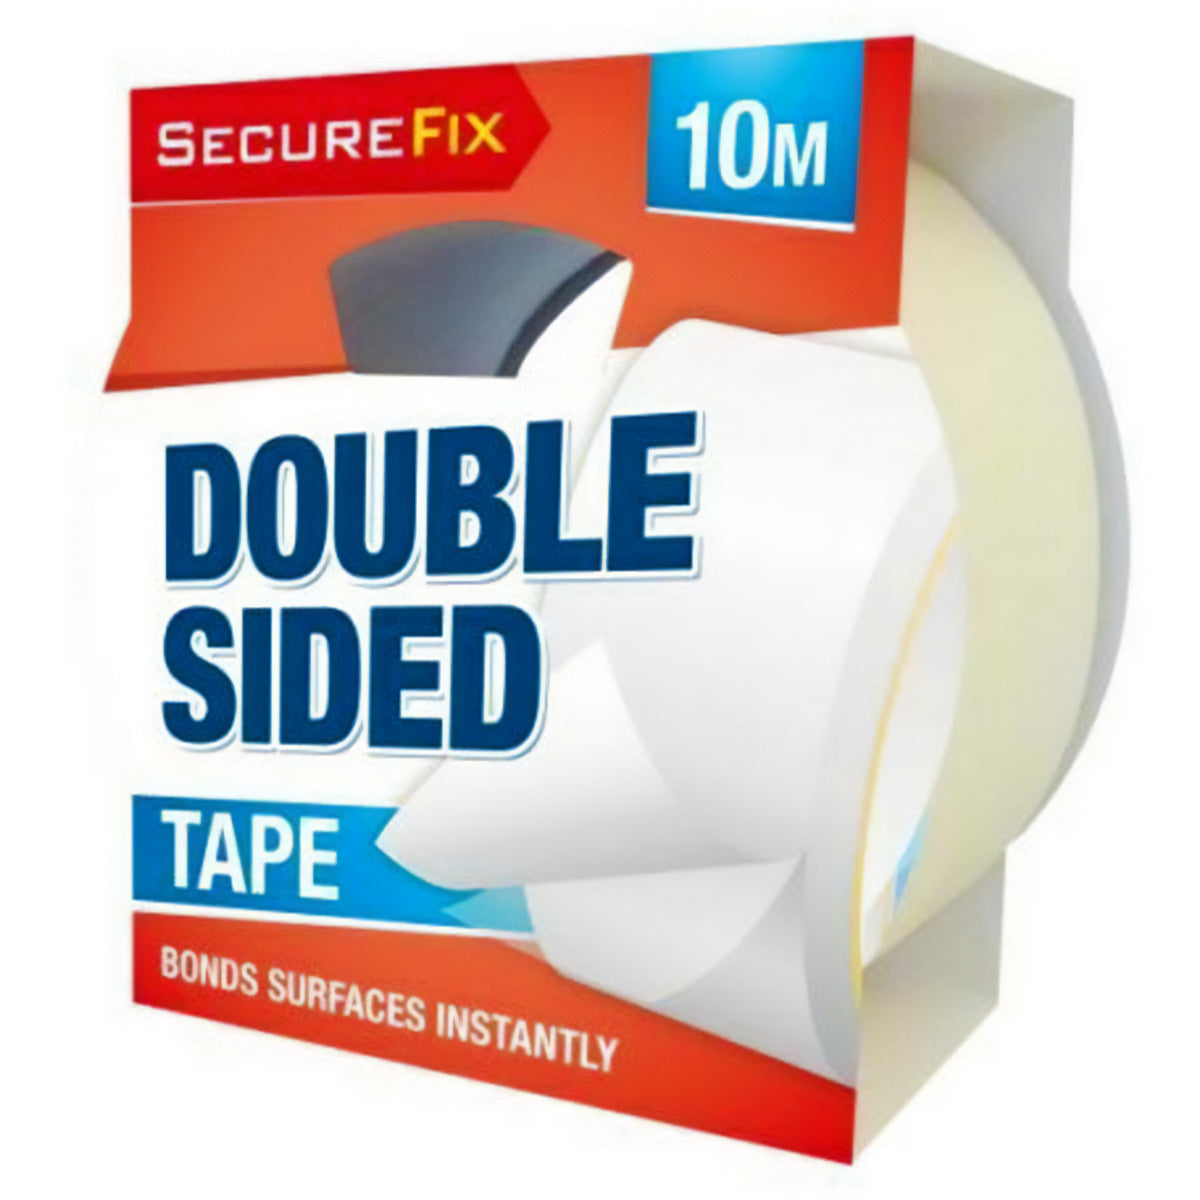 SecureFix - Double Sided Tape - 10m - Continental Food Store